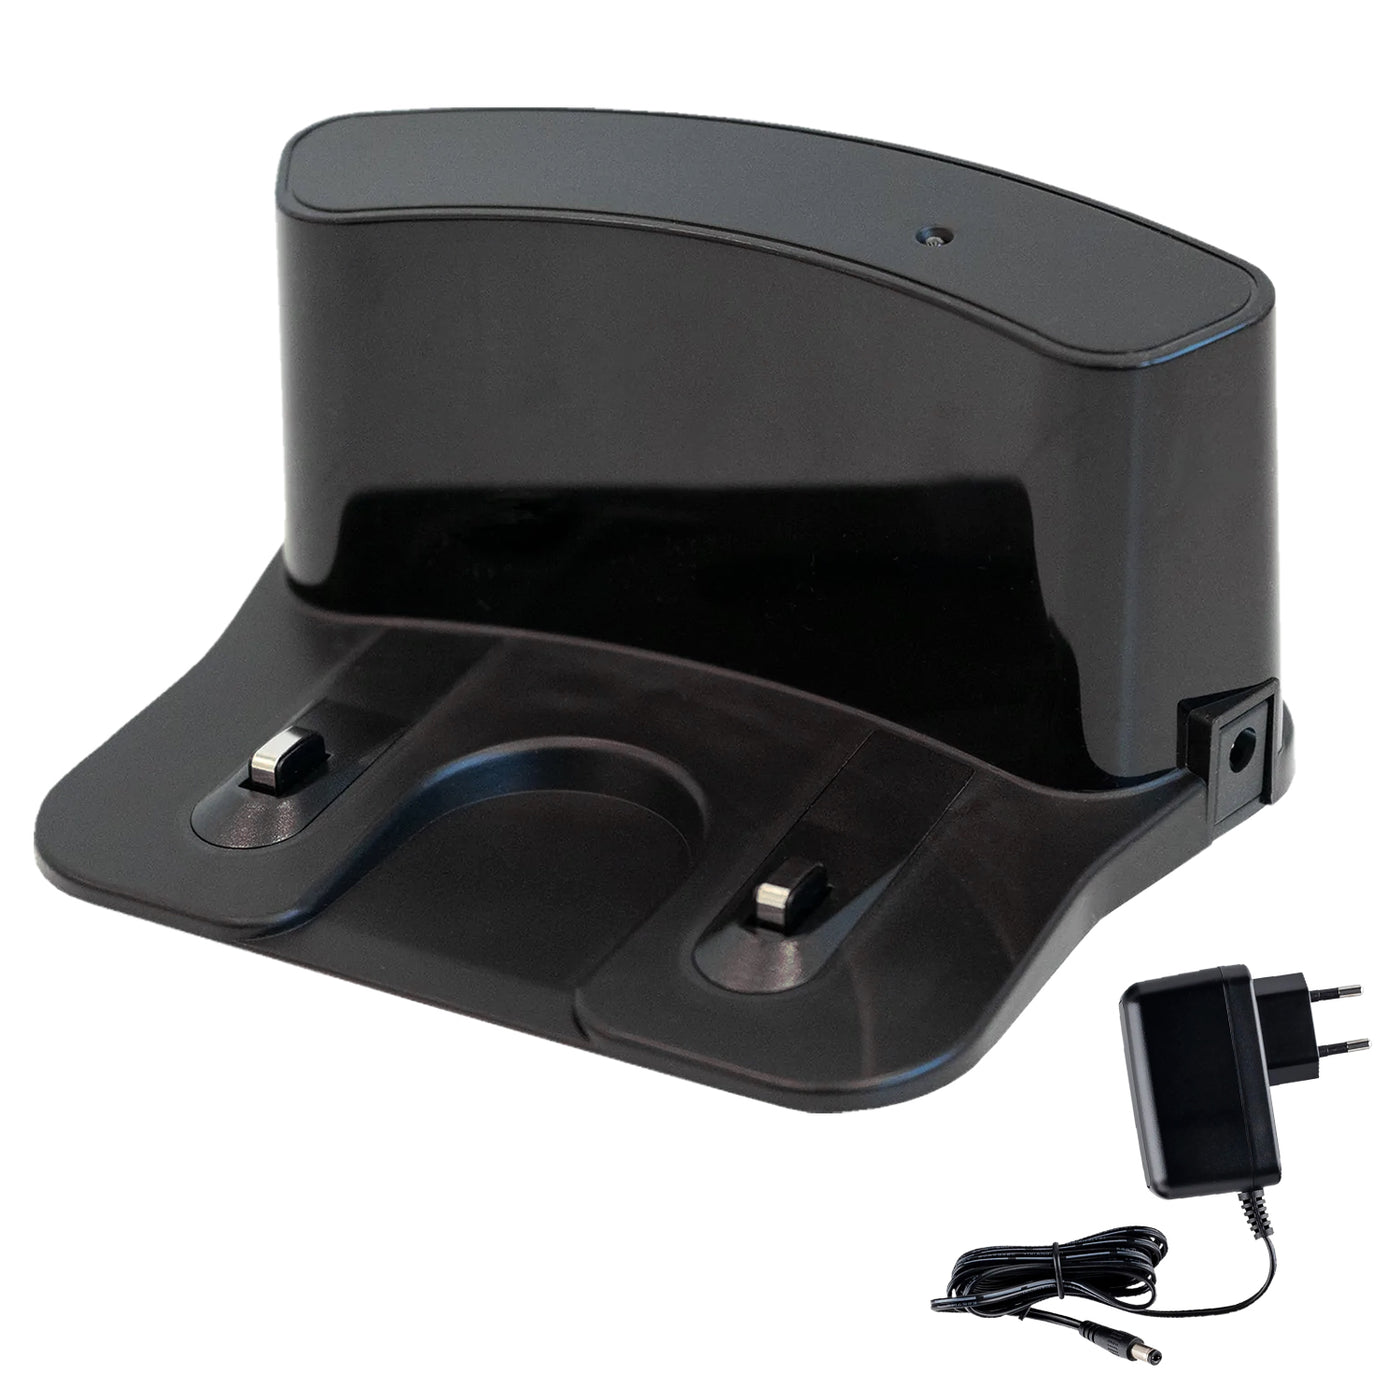 Replacement ZACO charging station incl. power cord for V3sPro, V4, A4s, V5sPro, V5x and V6